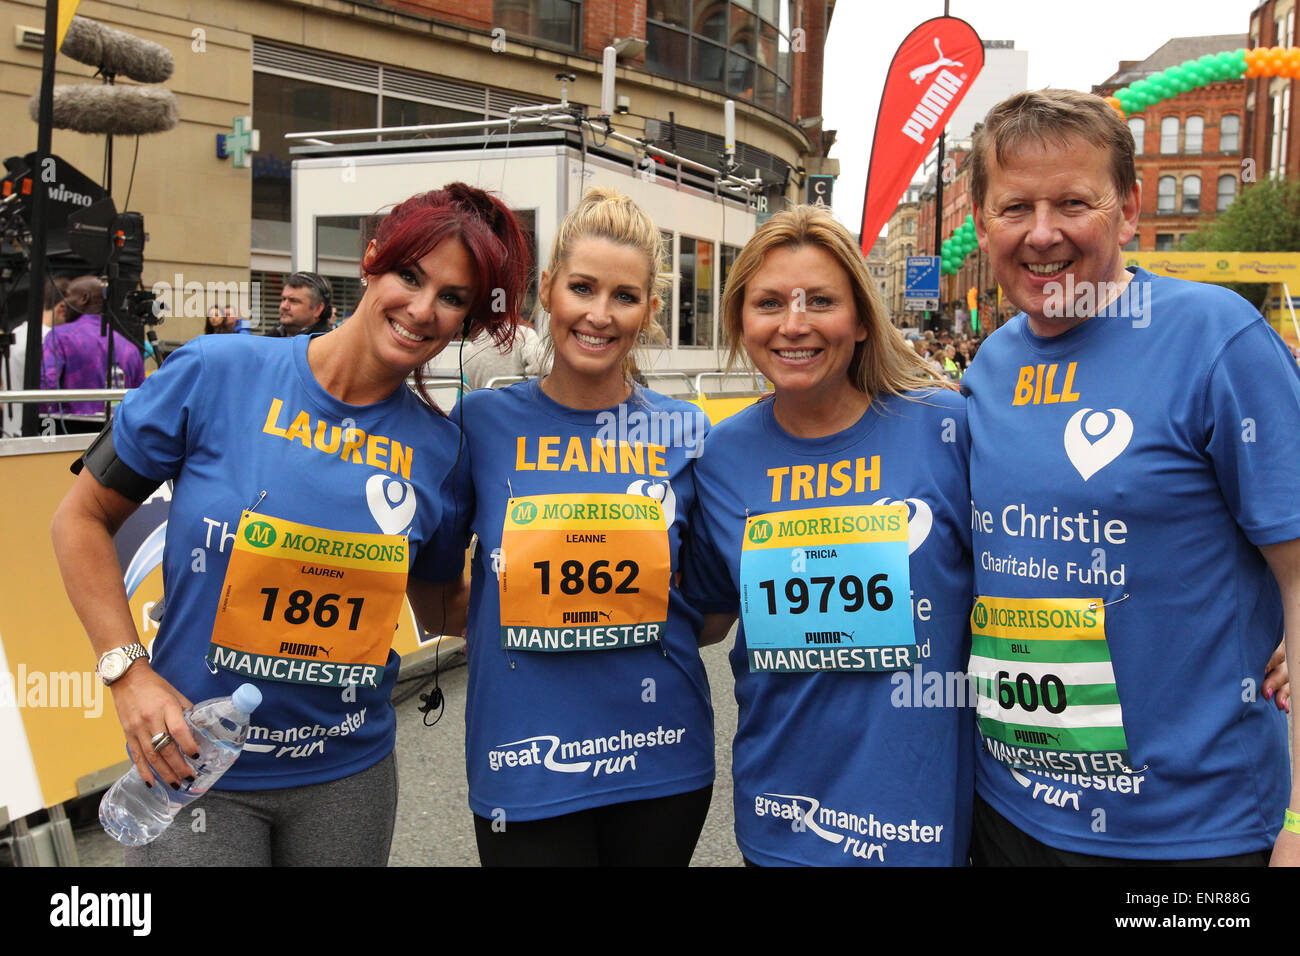 Manchester, UK. Sunday 10 May 2015. The city hosted the Morrison's Great Manchester Run in the heart of the city centre. Celebrity members of The Christie Team: reality TV stars Lauren Simon & Leanne Browne, actress Tricia Penrose & BBC presenter Bill Turnbull. Credit:  Michael Buddle/Alamy Live News Stock Photo